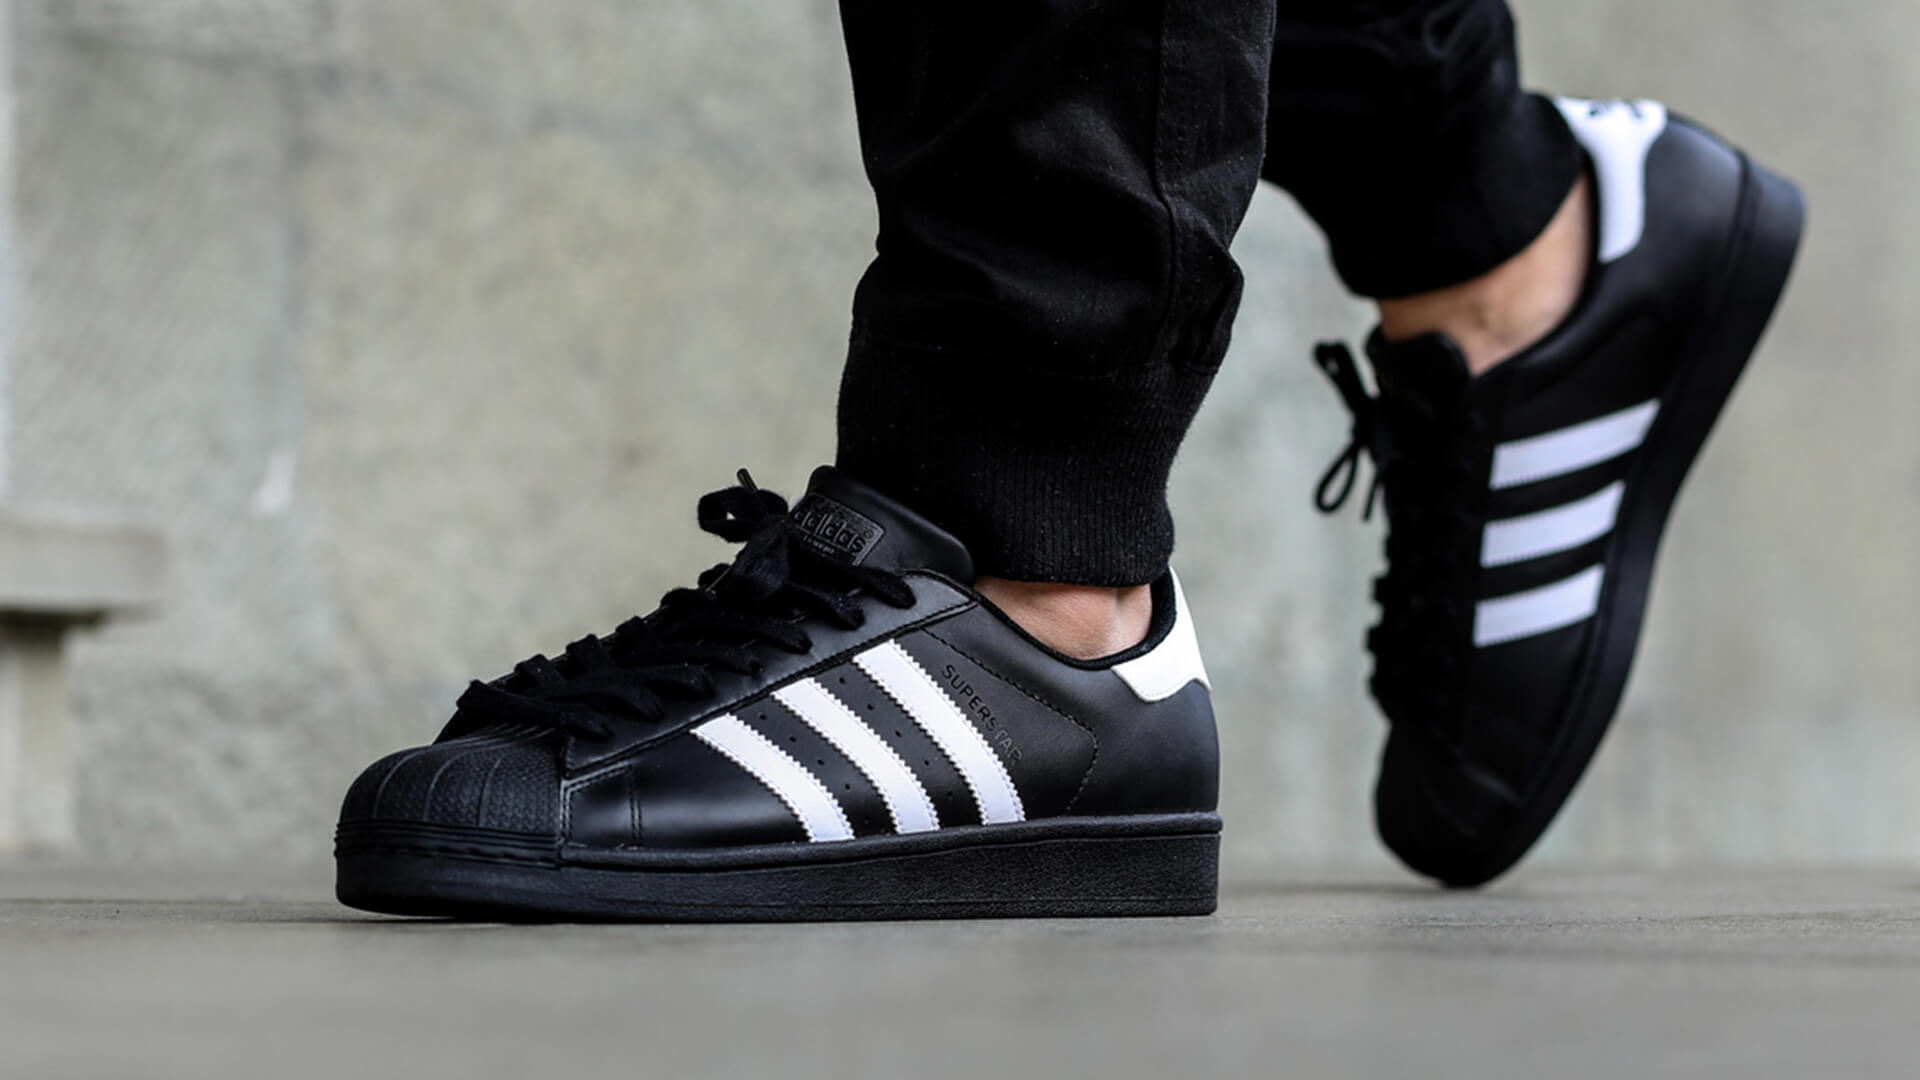 adidas superstar without gold